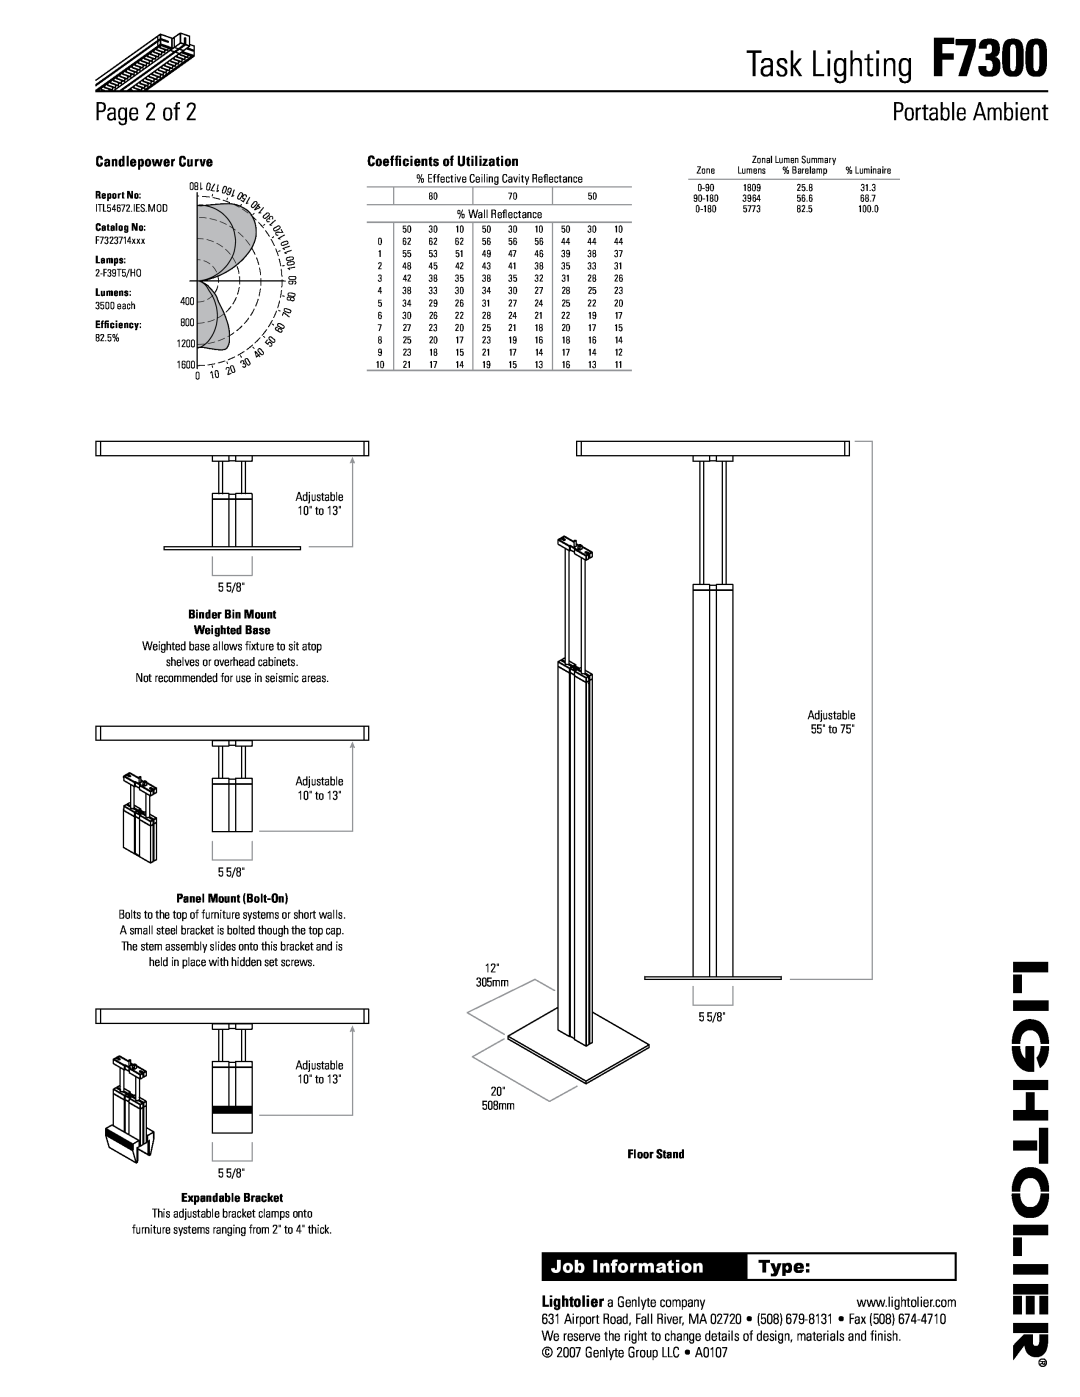 Lightolier specifications Page, Task Lighting F7300, Portable Ambient, Job Information, Type 